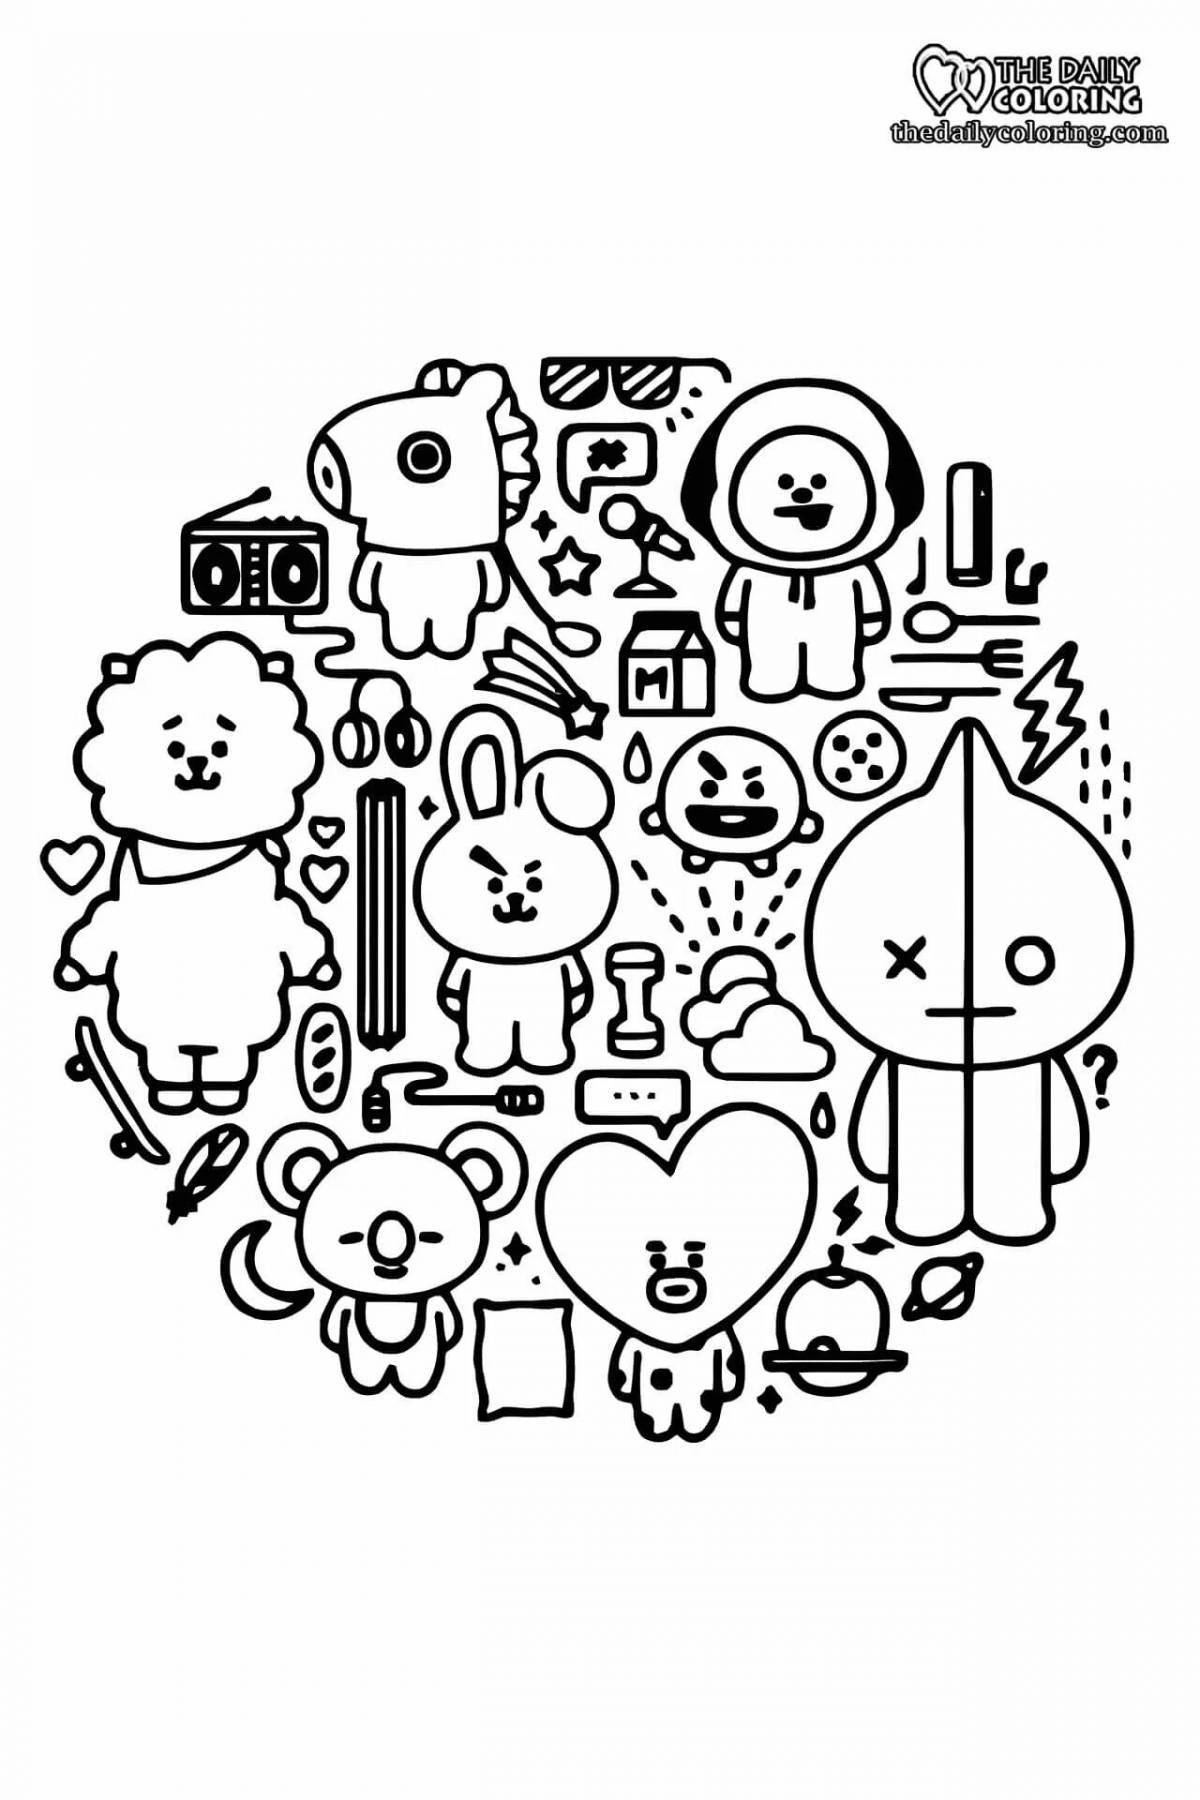 Cute babies coloring page for stickers